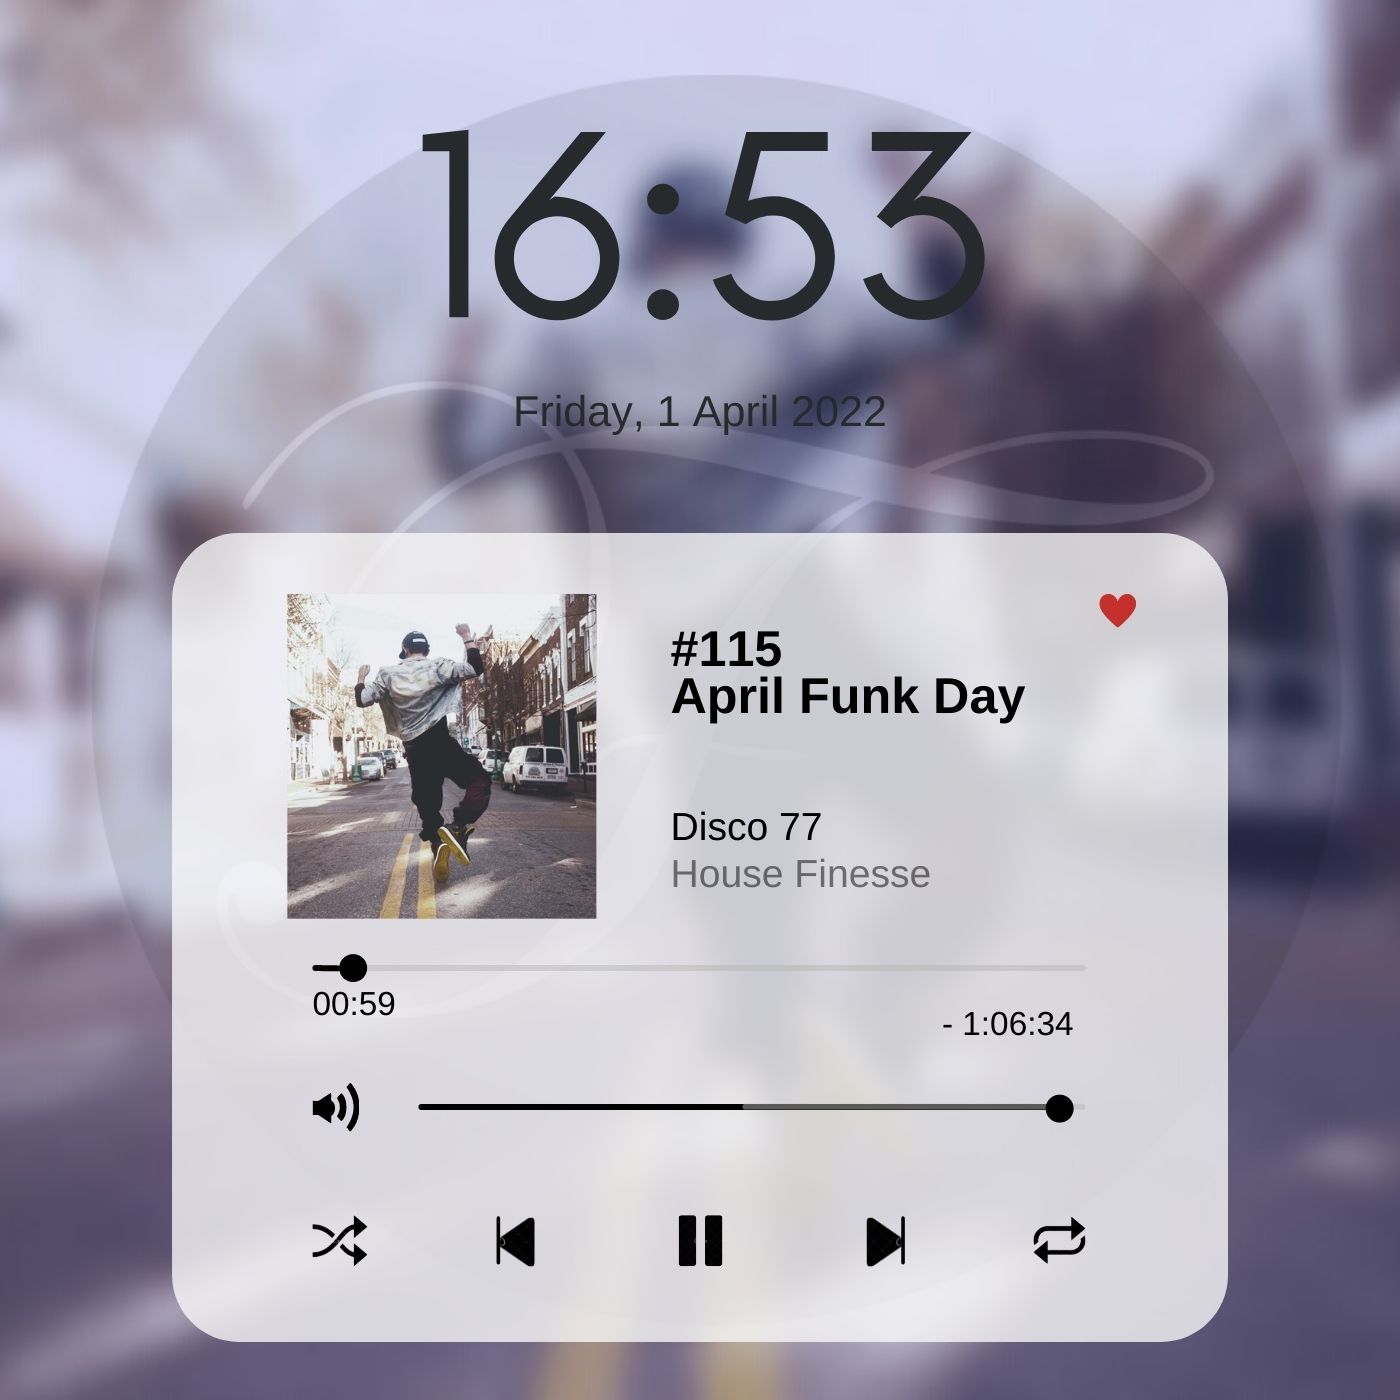 April Funk Day with Disco 77